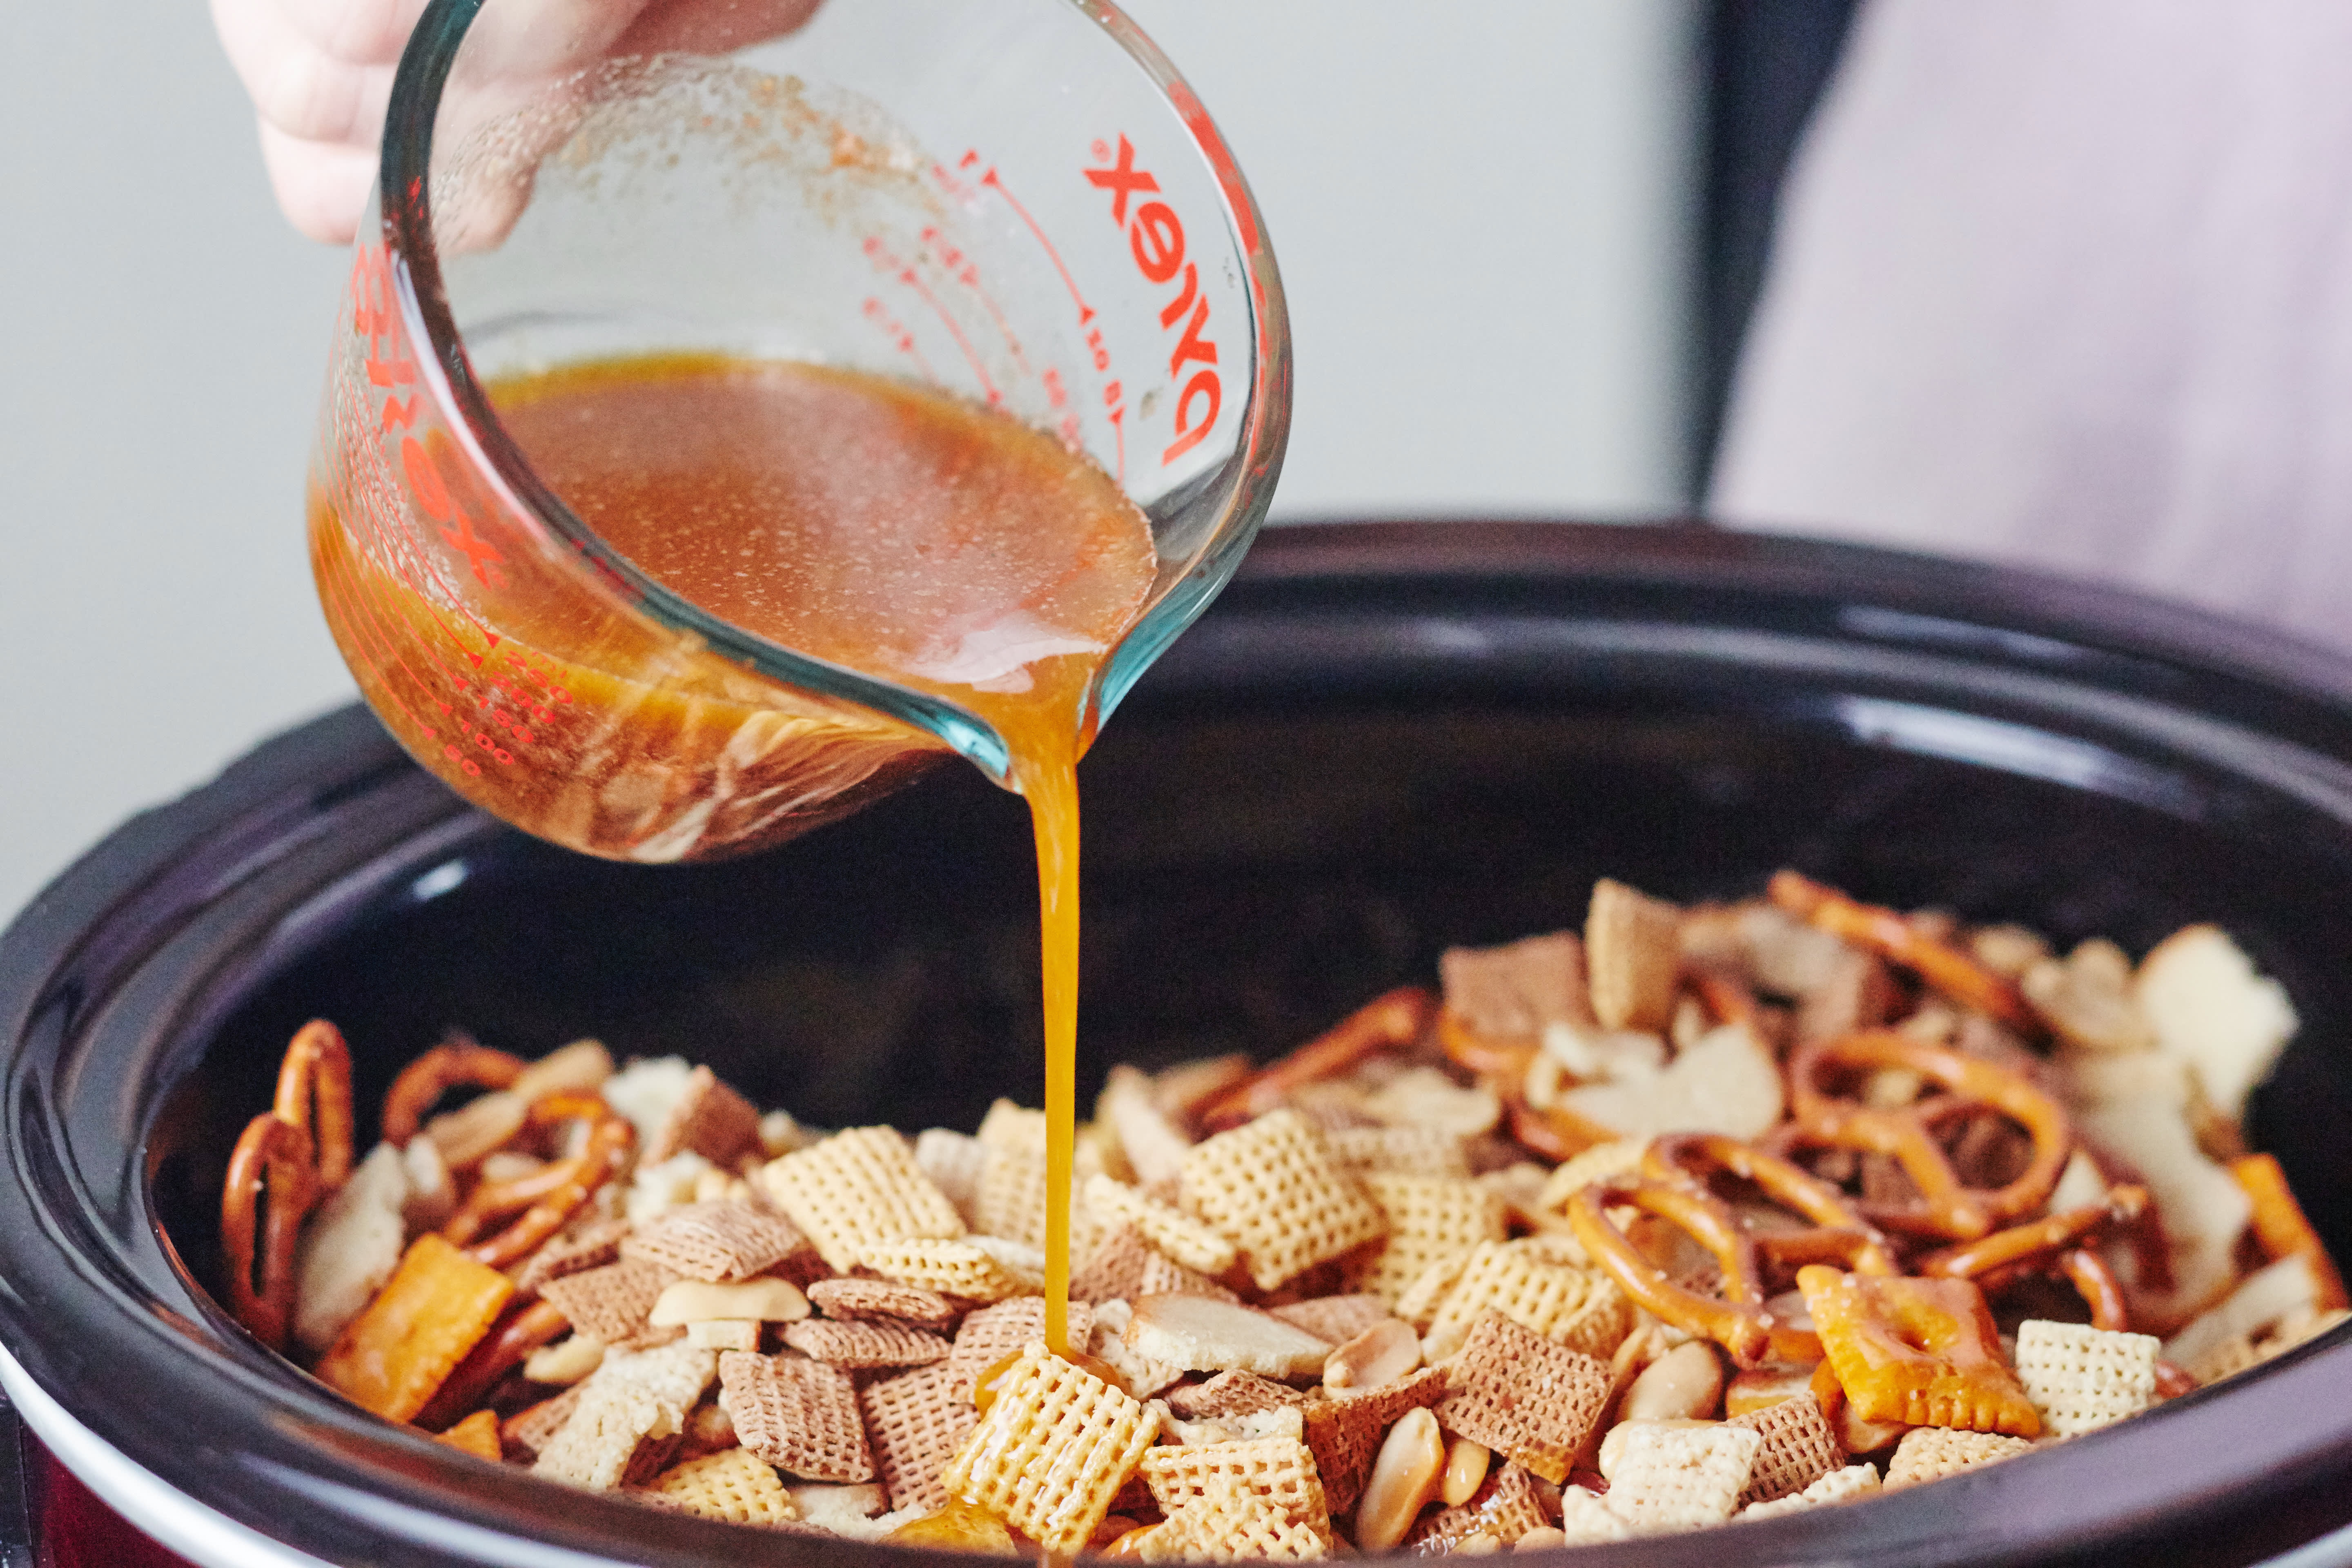 Chex Mix Recipe: Crockpot Herbed Chex Mix